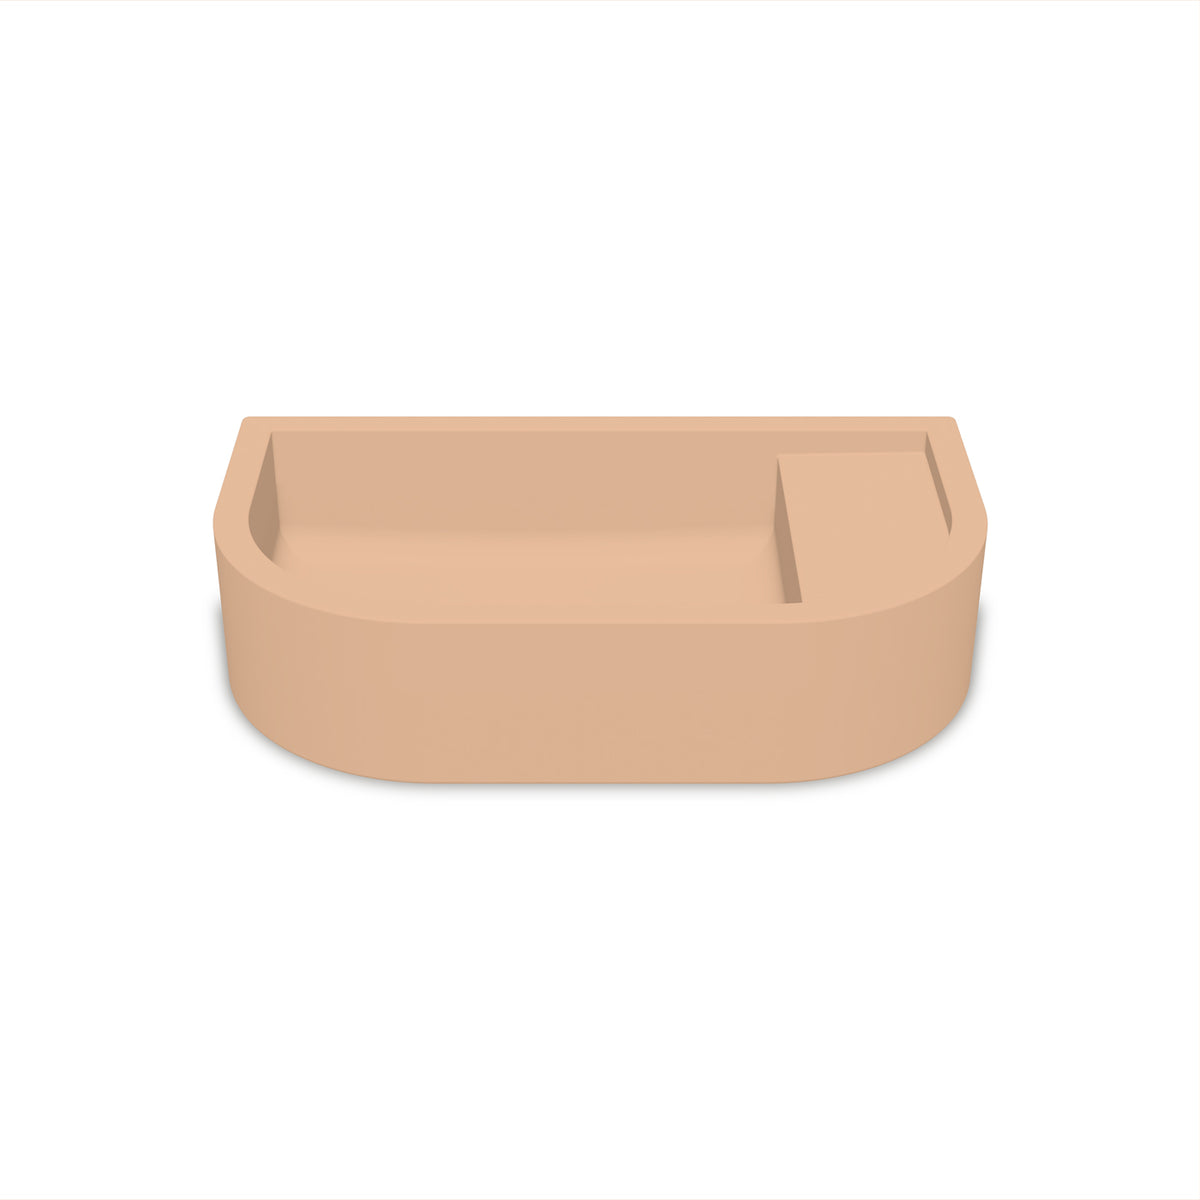 Loop 02 Basin - Overflow - Surface Mount (Pastel Peach,No Tap Hole,White)